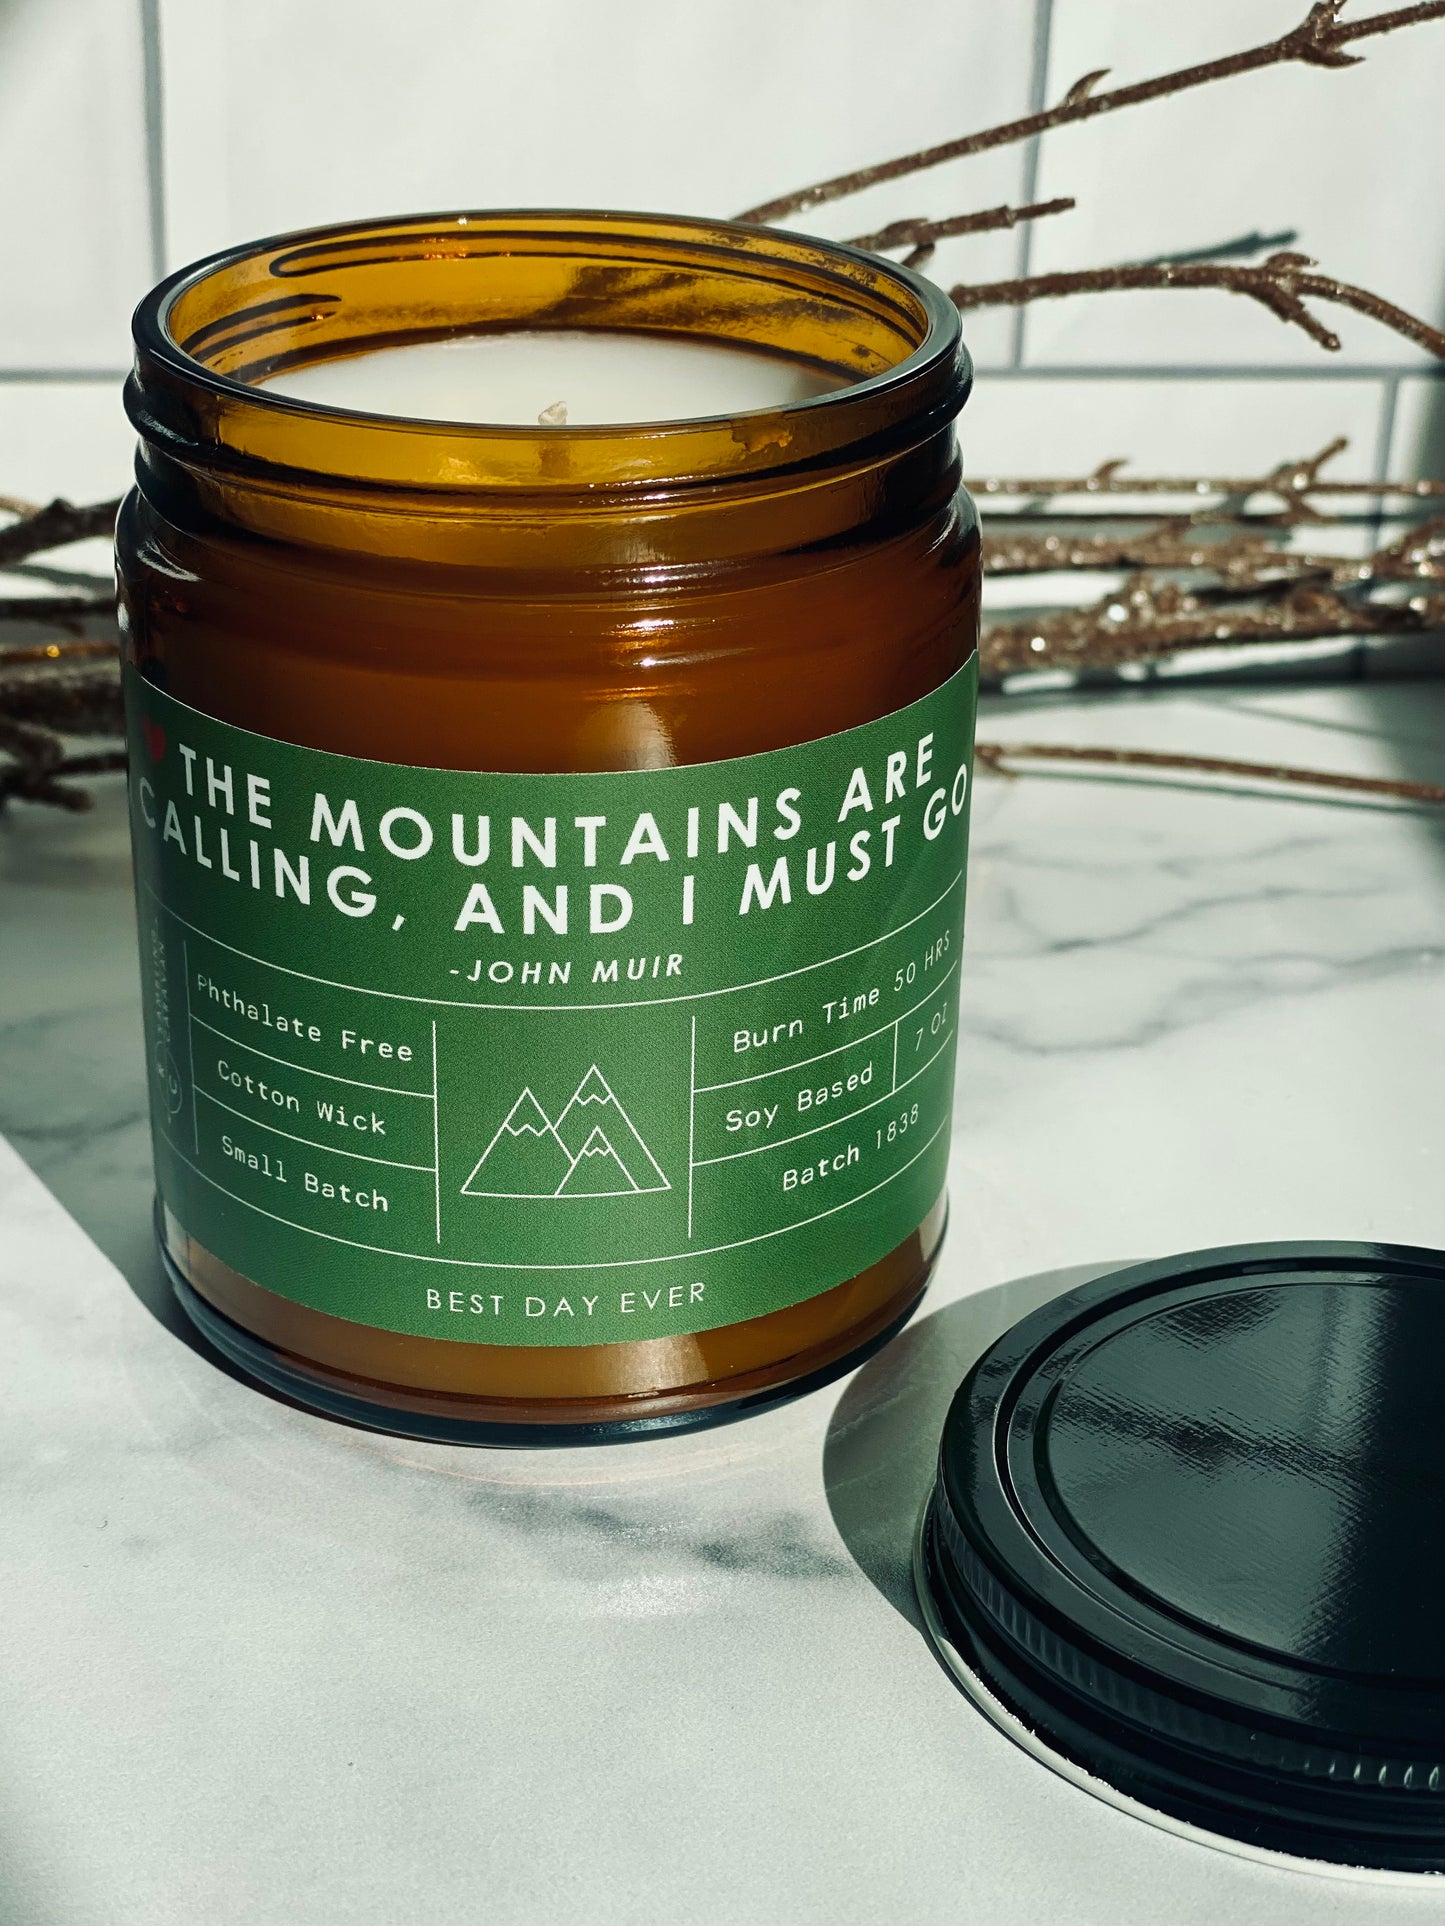 The Mountains Are Calling, And I Must Go (John Muir) Candle